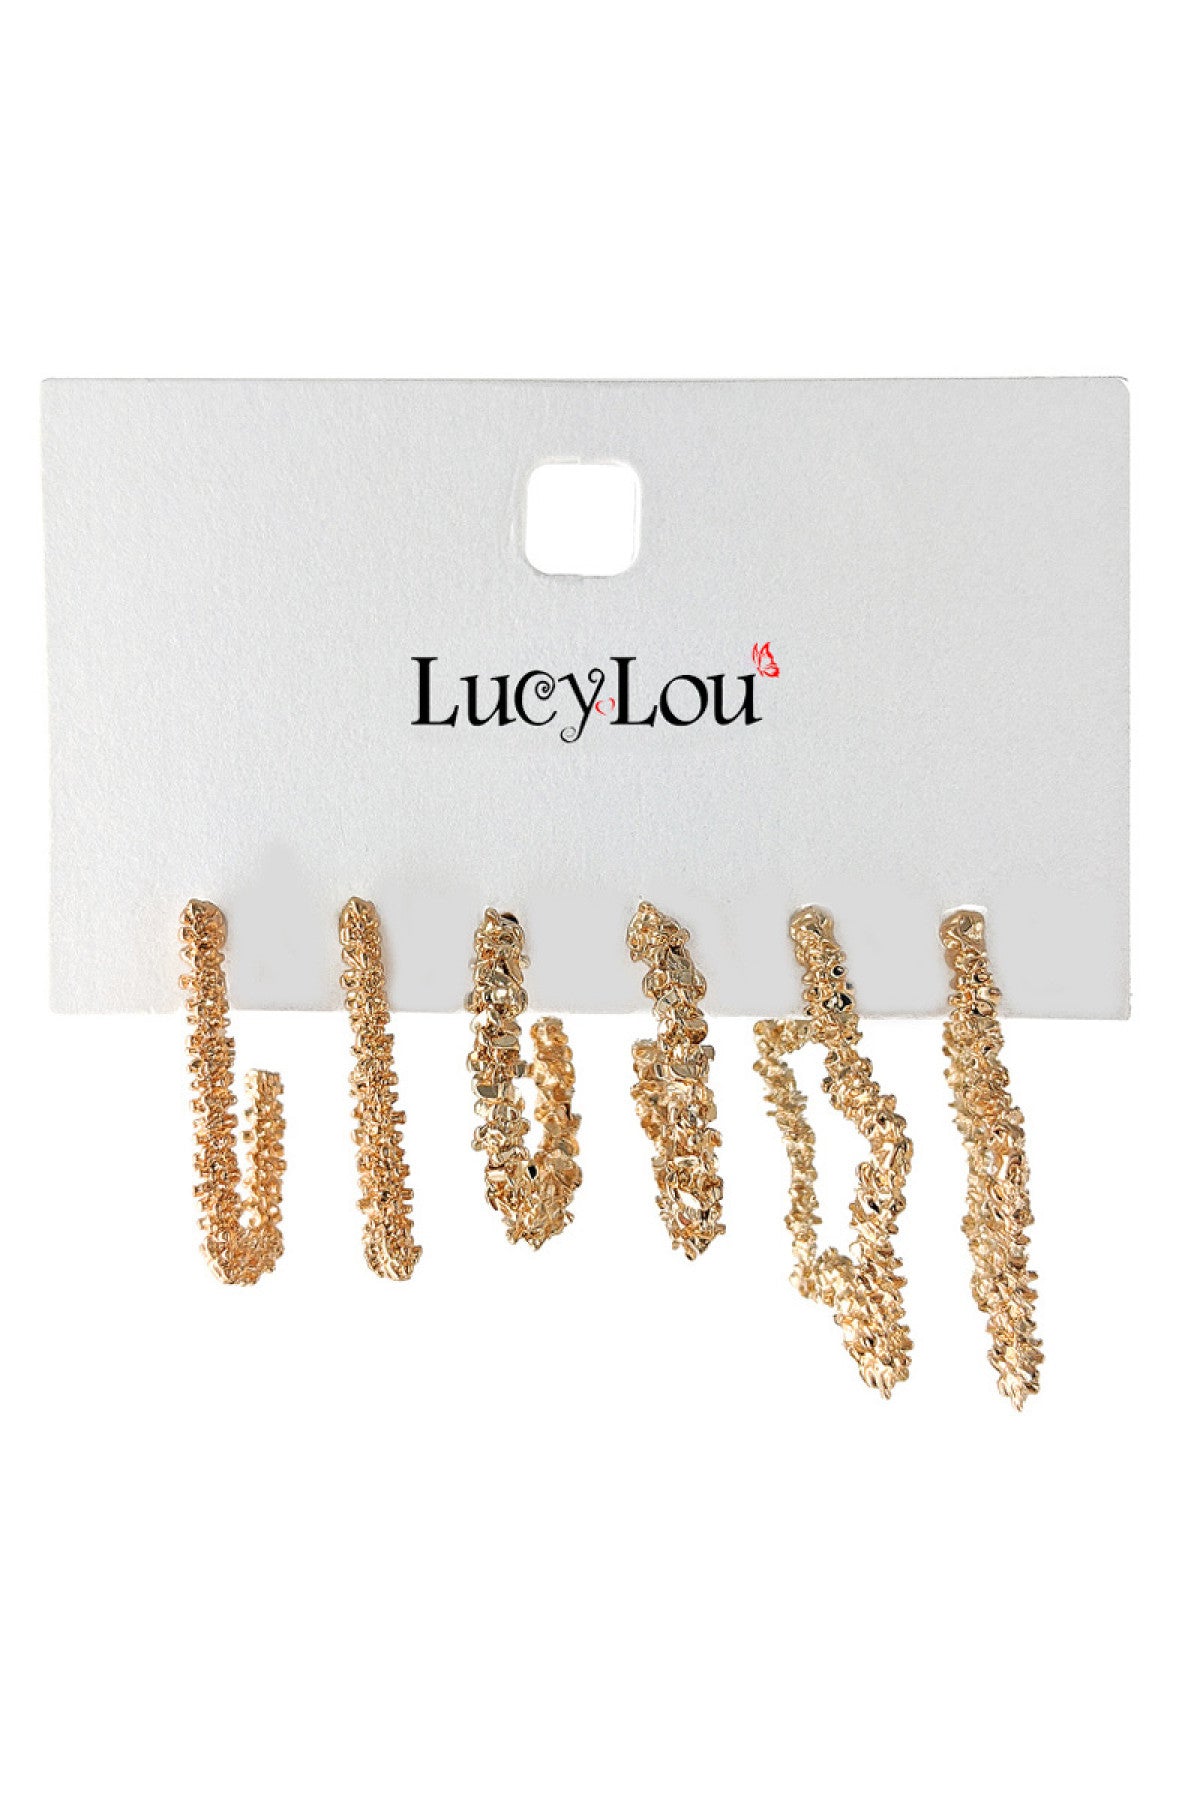 GOLD 3 PAIRS ON A CARD POPCORN TEXTURE FASHION EARRING SET/6SETS